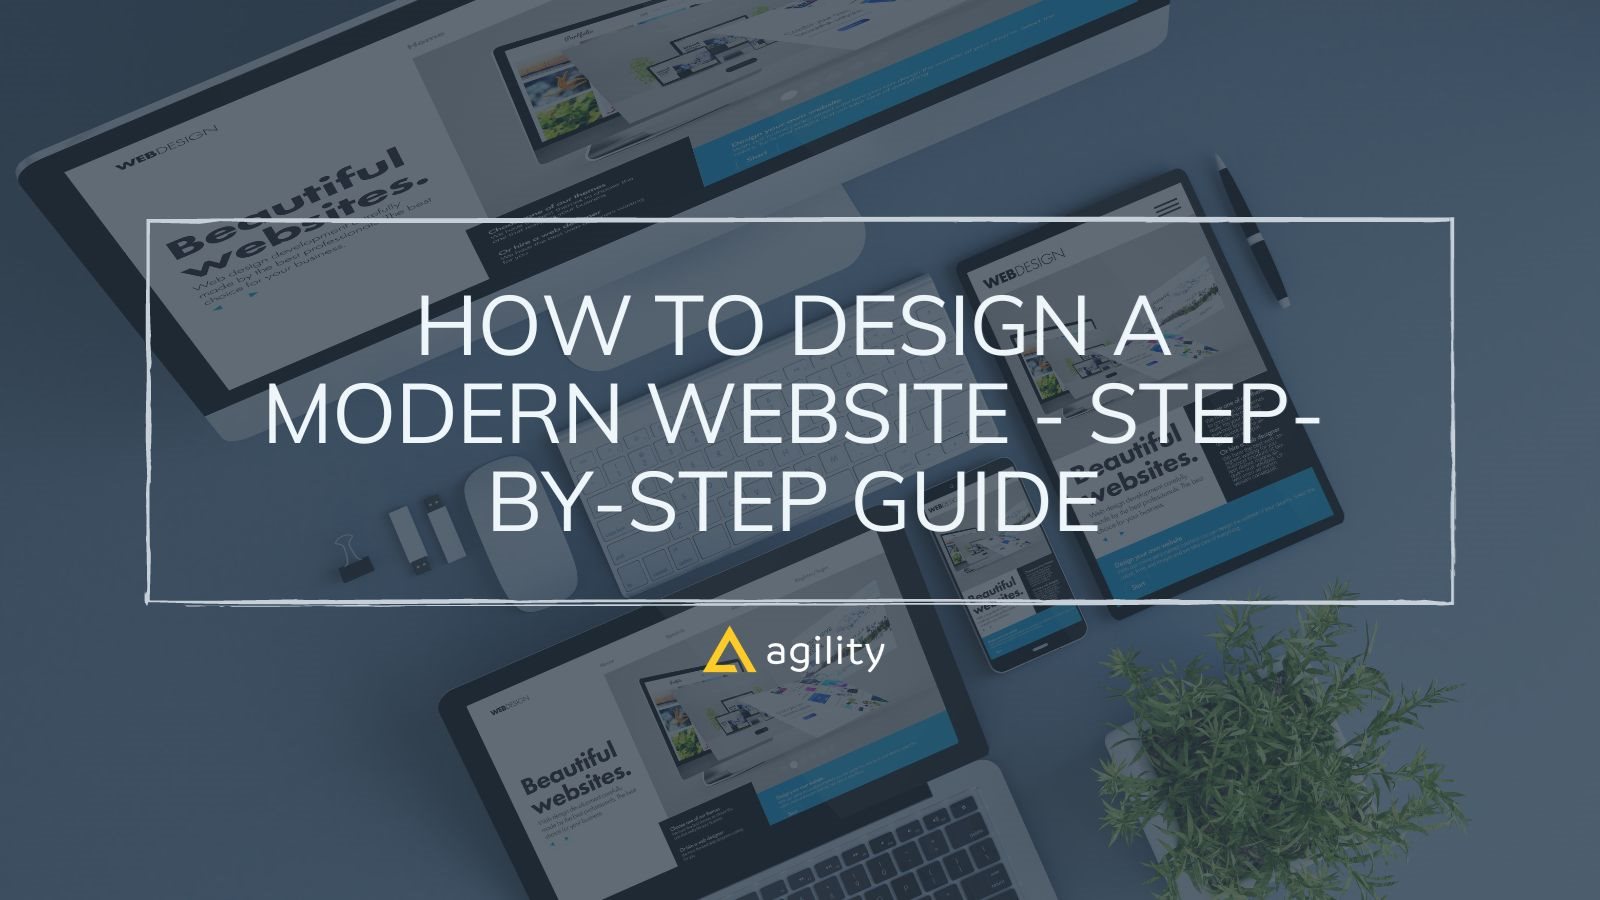 Step-By-Step Guide to modern sites